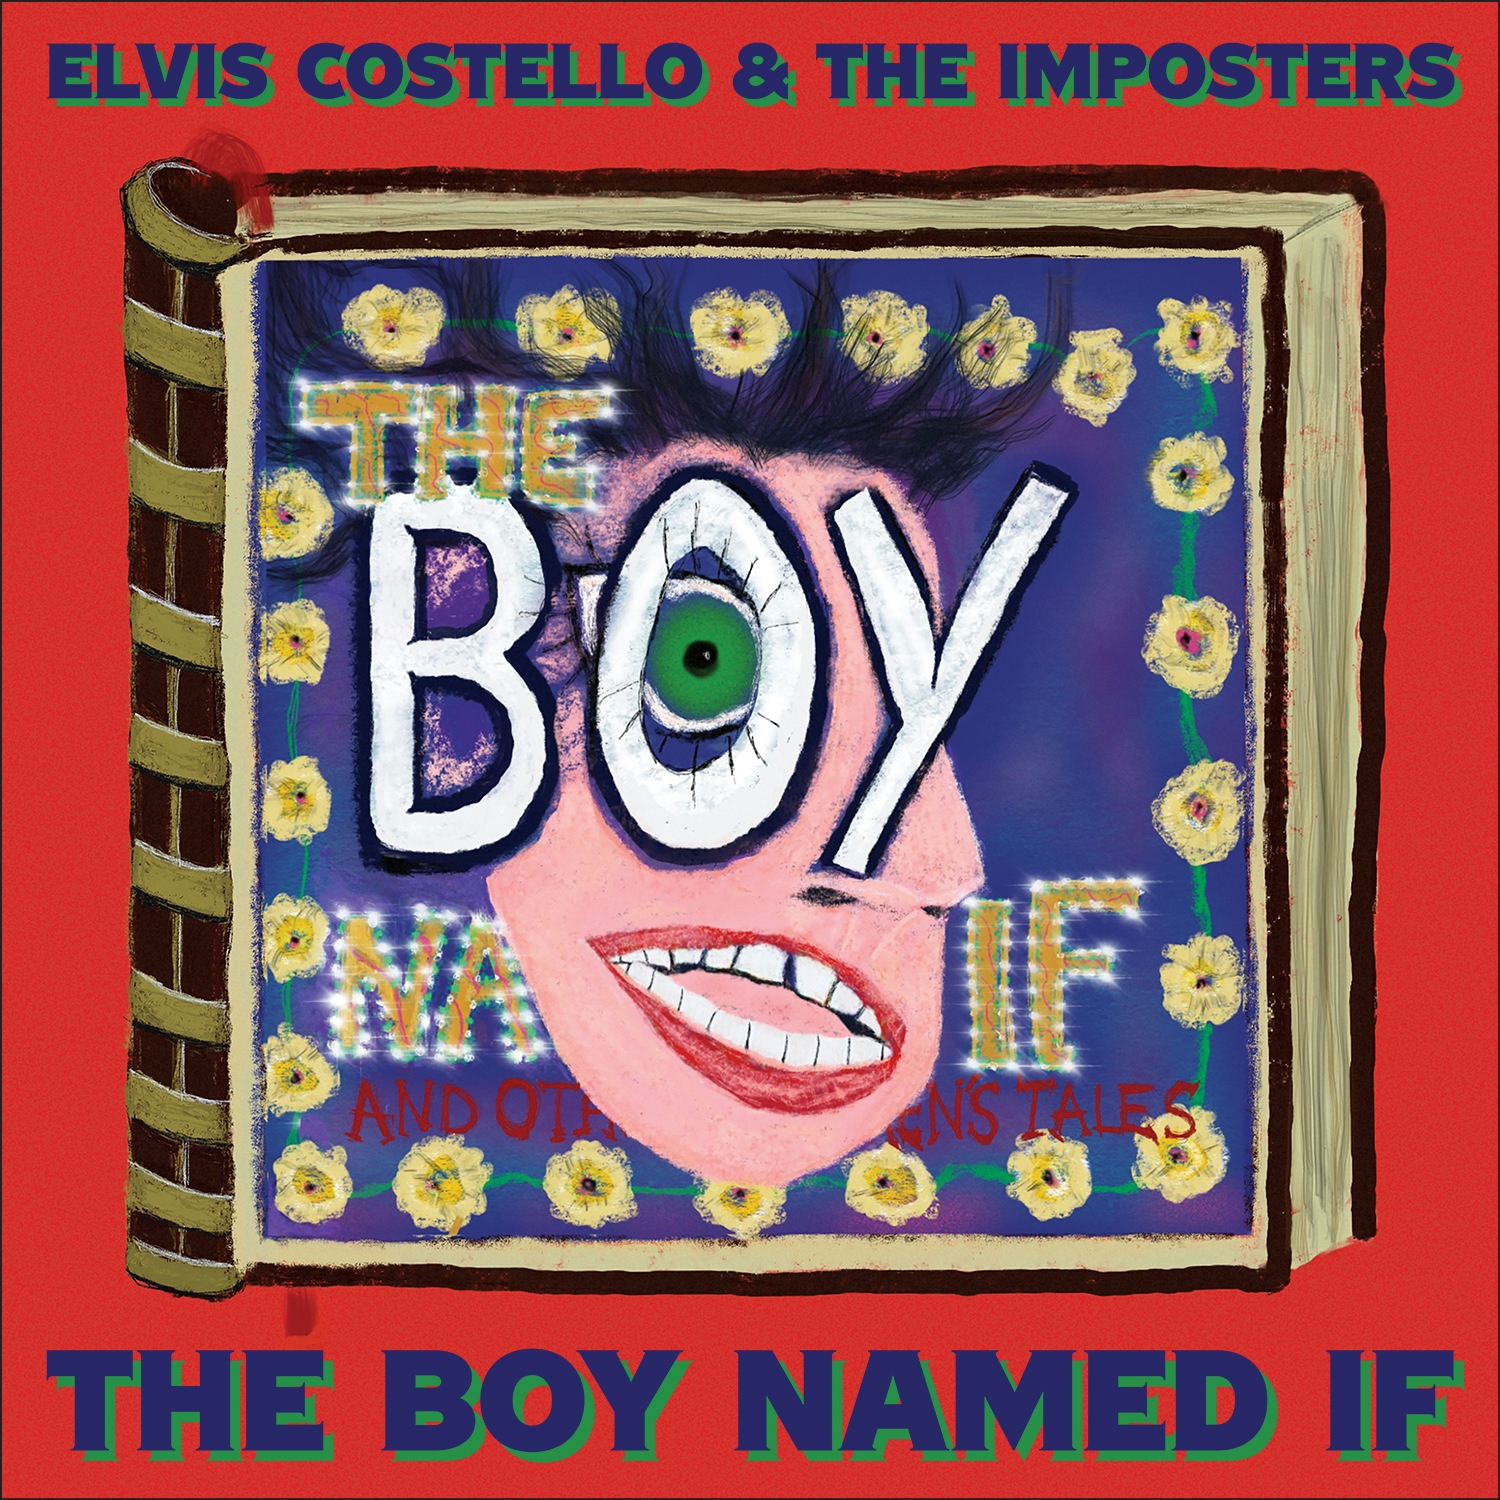 Album artwork for The Boy Named If by Elvis Costello and The Imposters